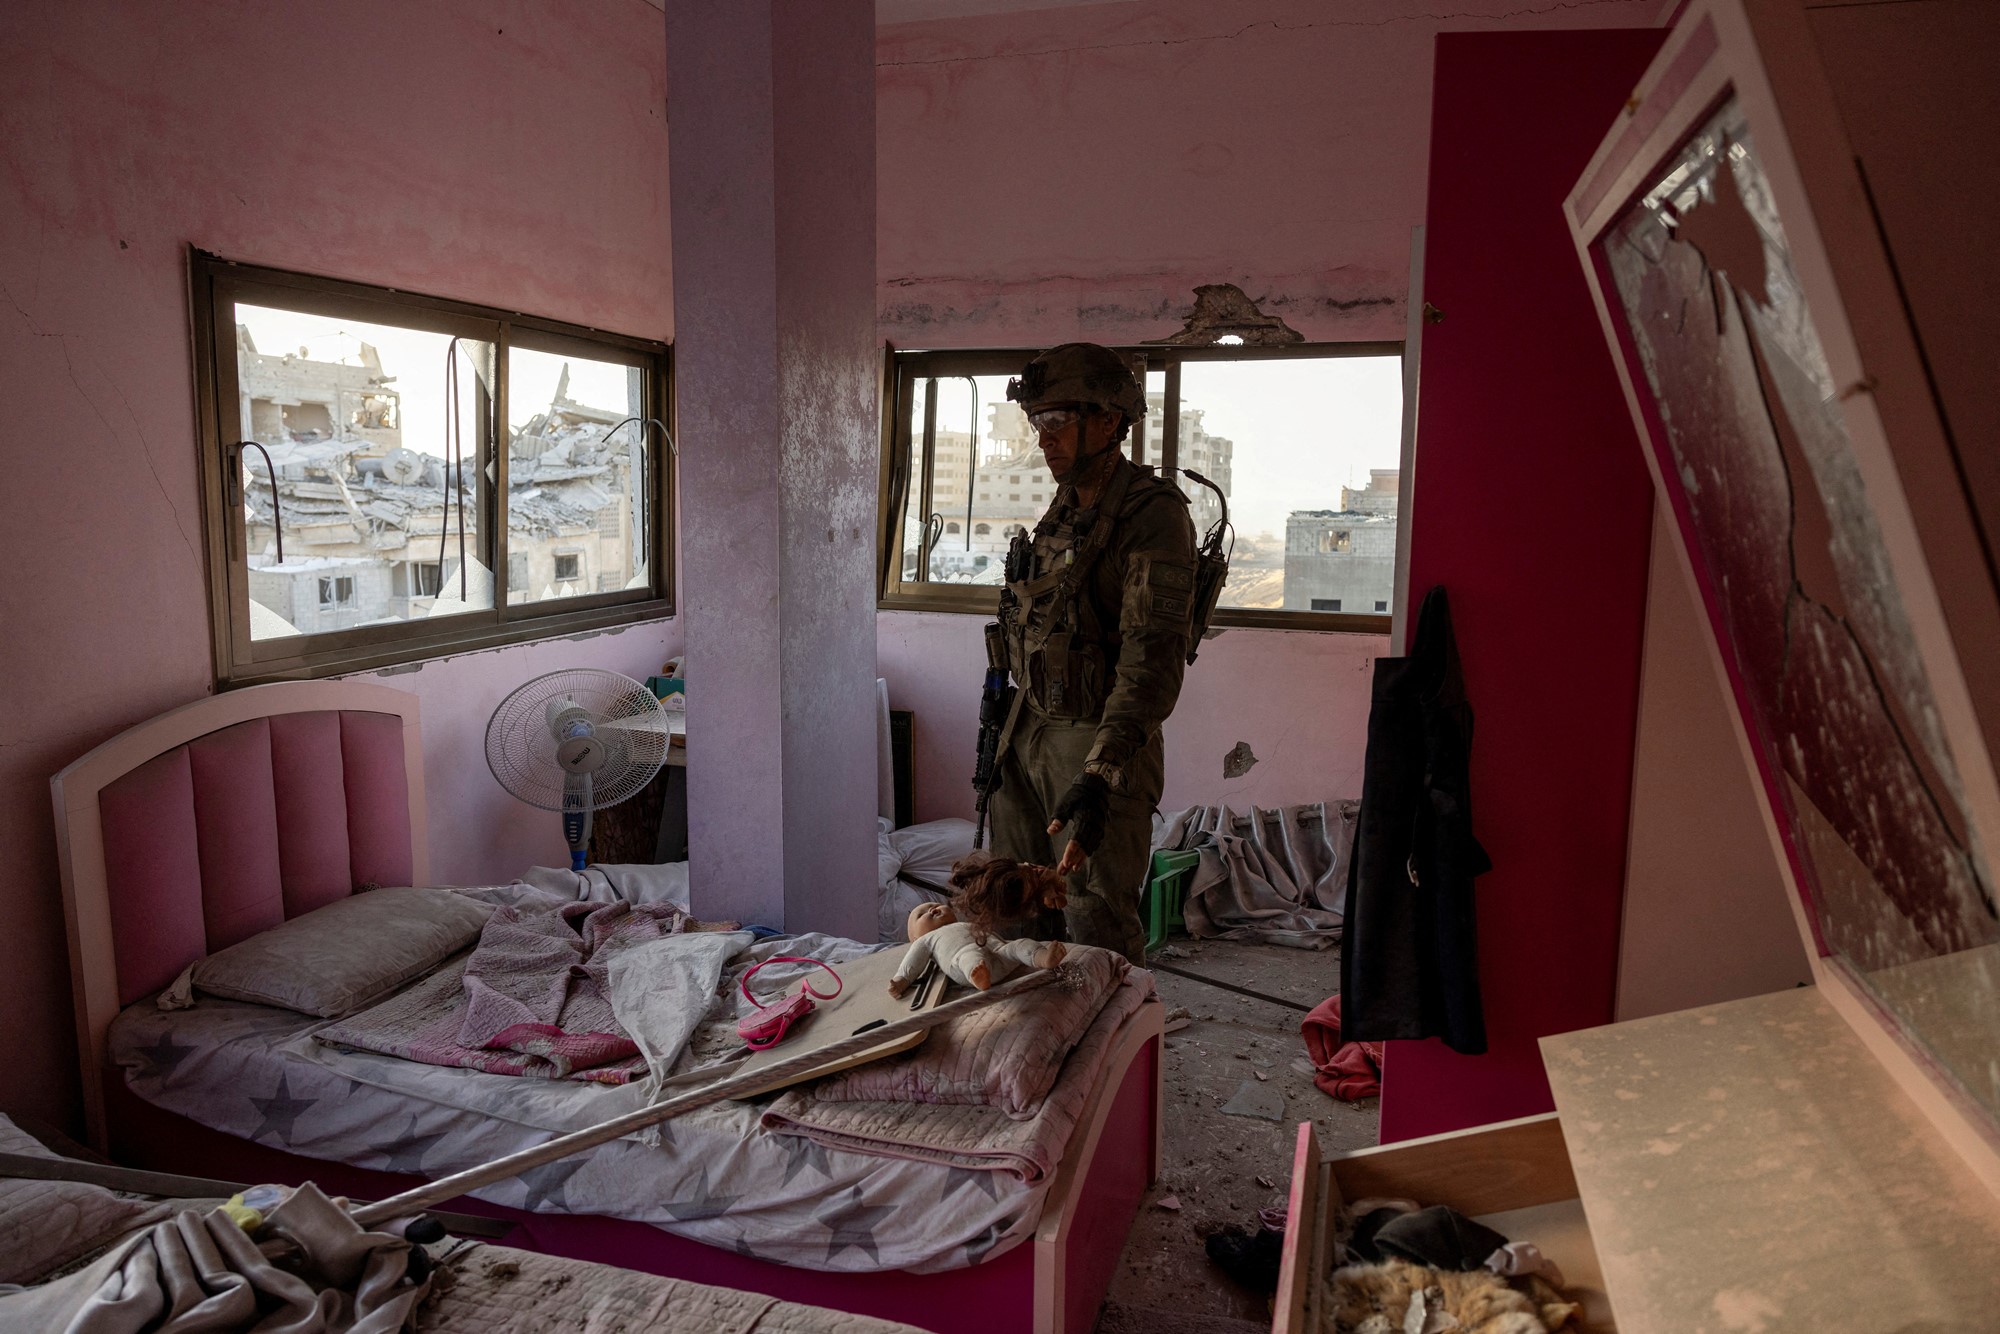 A man in army attire is standing in what looks like a child's pink bedroom.